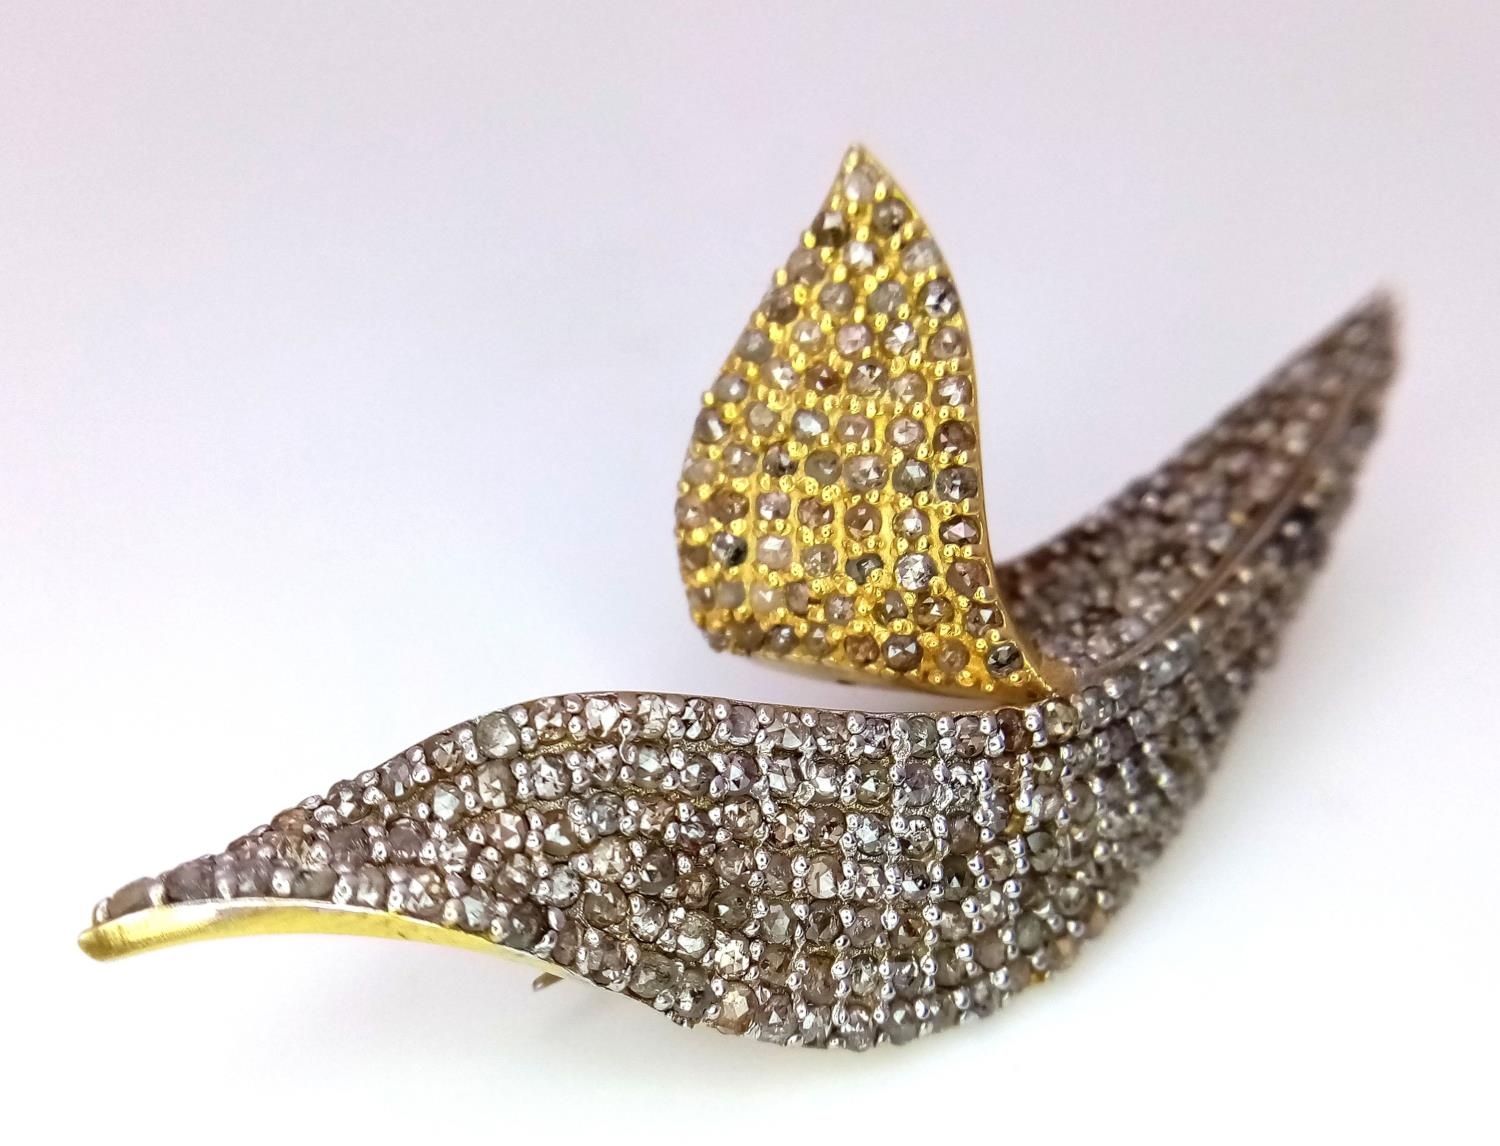 A Diamond Two Tone Leaf Cluster Brooch with 2ctw of Diamonds. Set in 925 Silver. 6g total weight. - Image 2 of 4